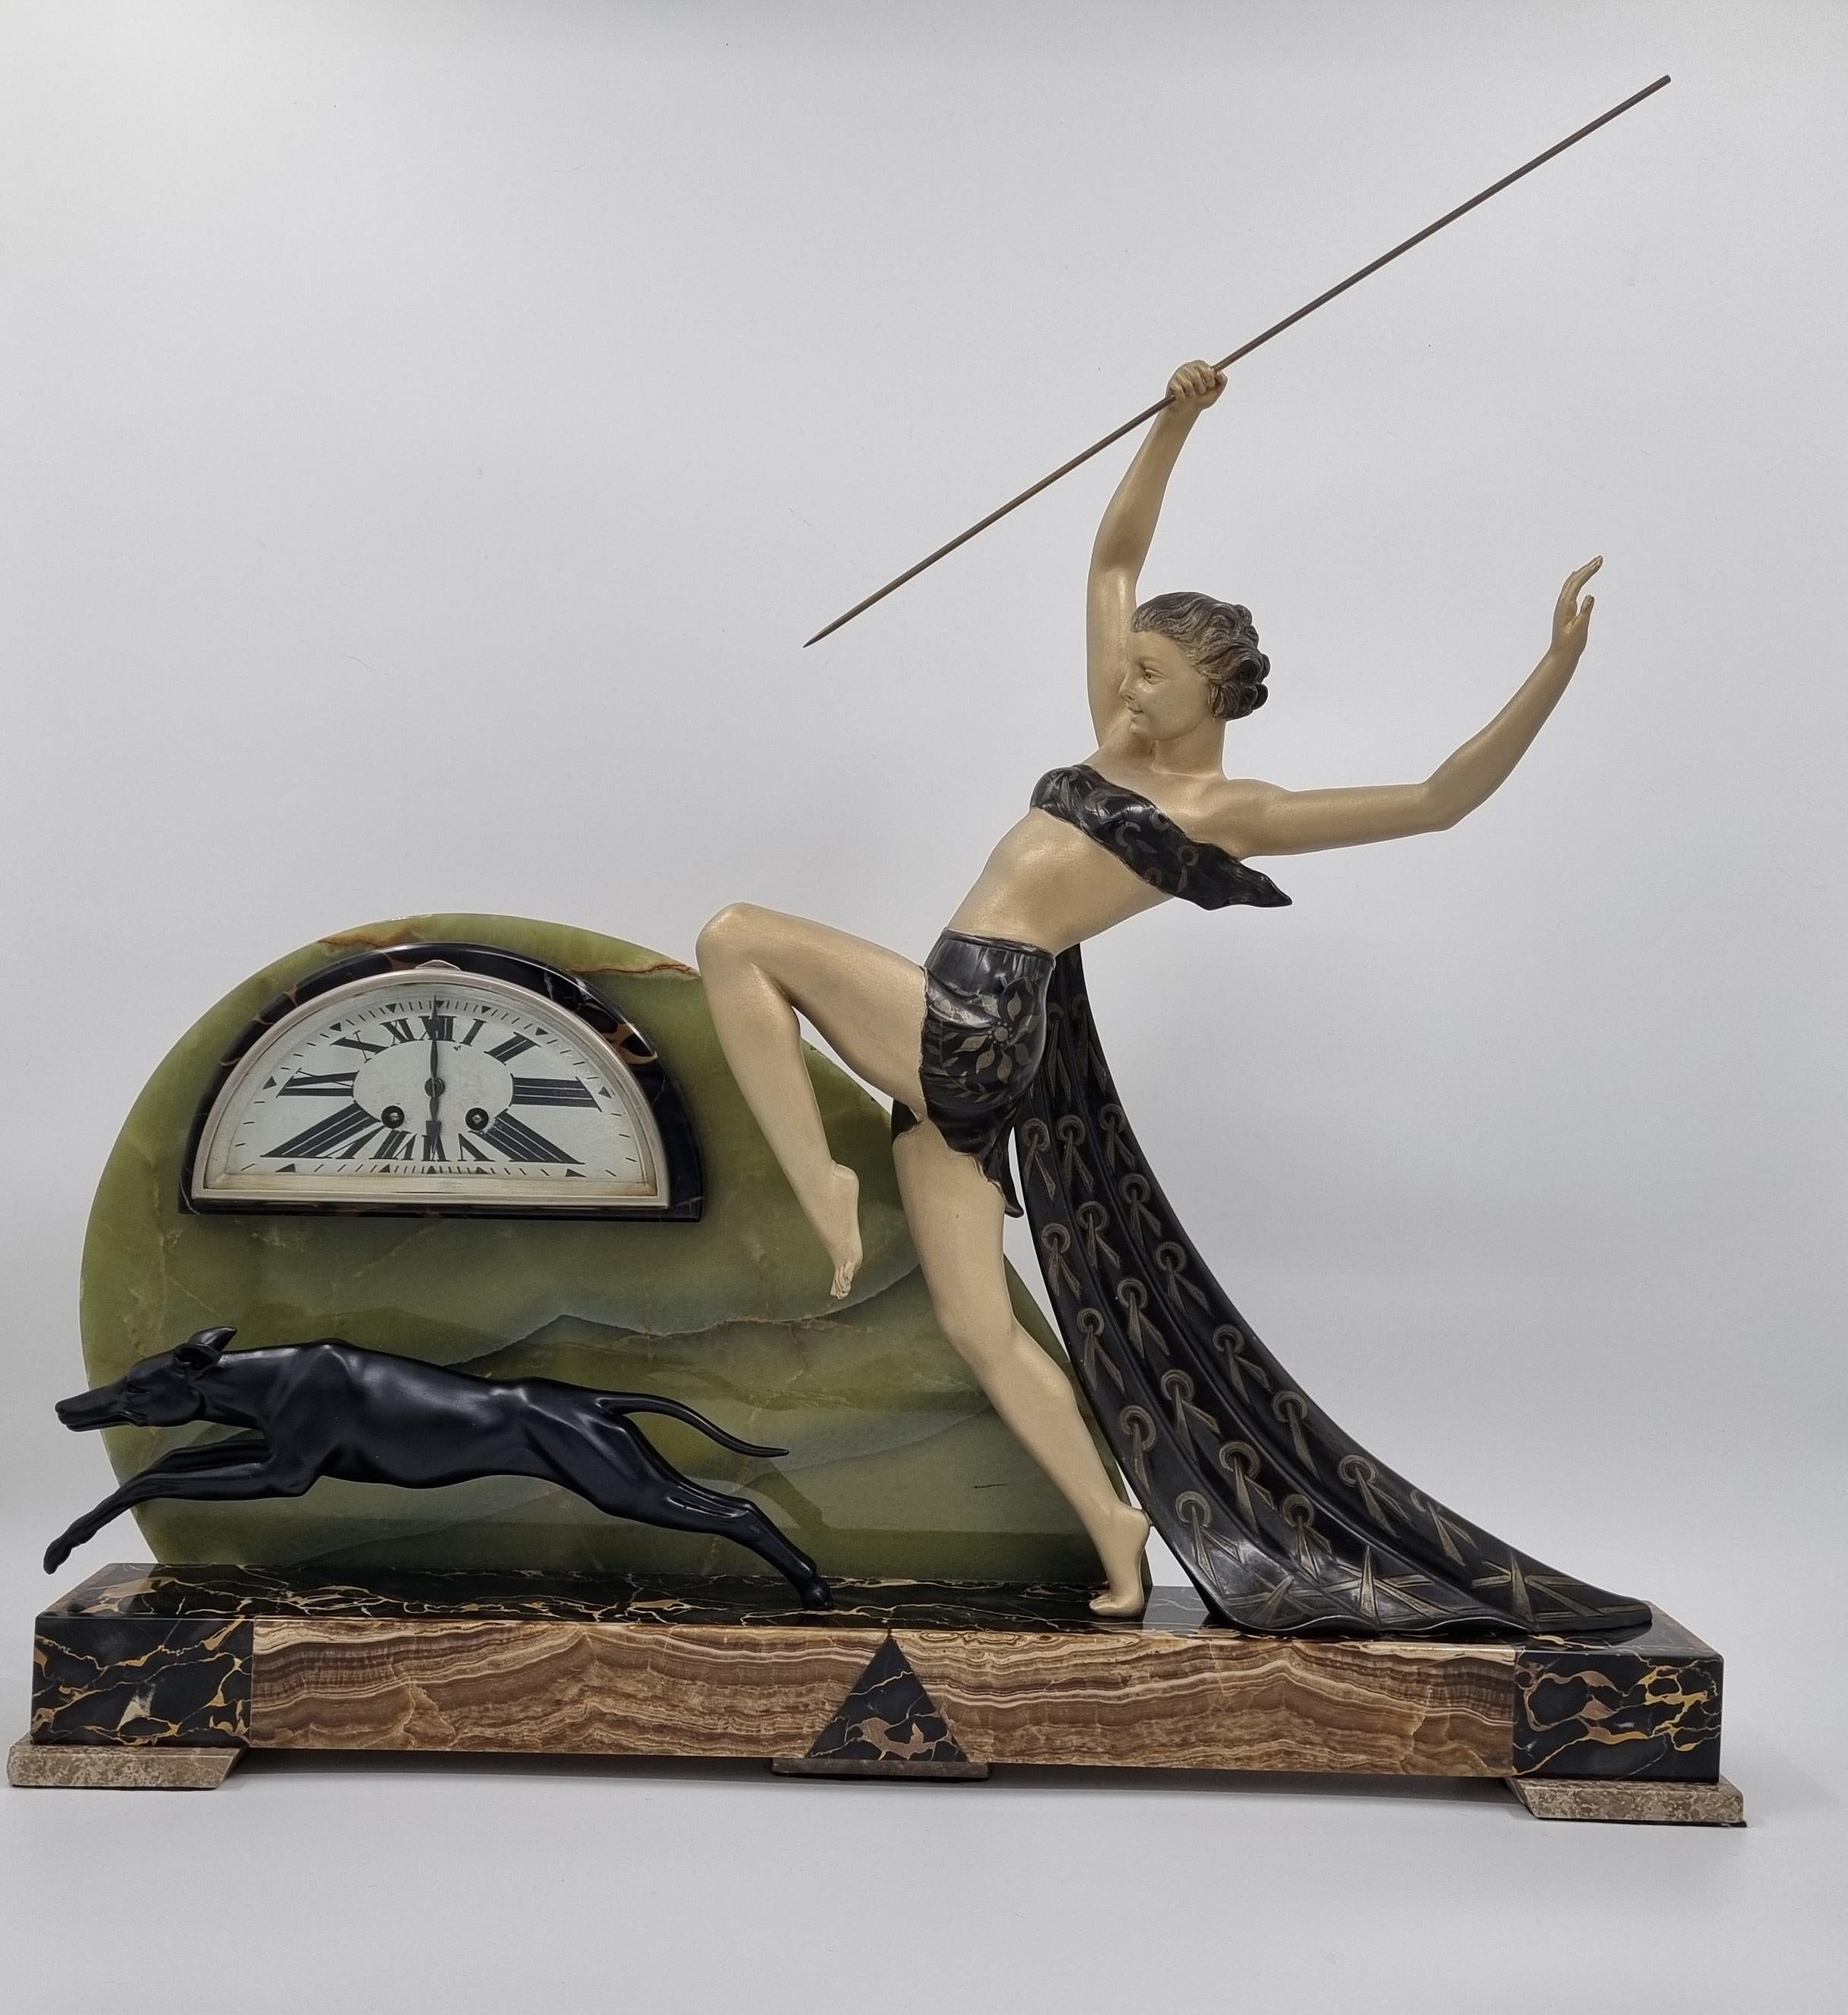 Diana the Huntress , Art Deco Clock Sculpture by the renowned French artist Limousin who was working in Paris during the 1920s -30s - signed to the back of the lady's cape. Streamlined , Art Deco , Geometric Design . In my opinion the pinnacle of